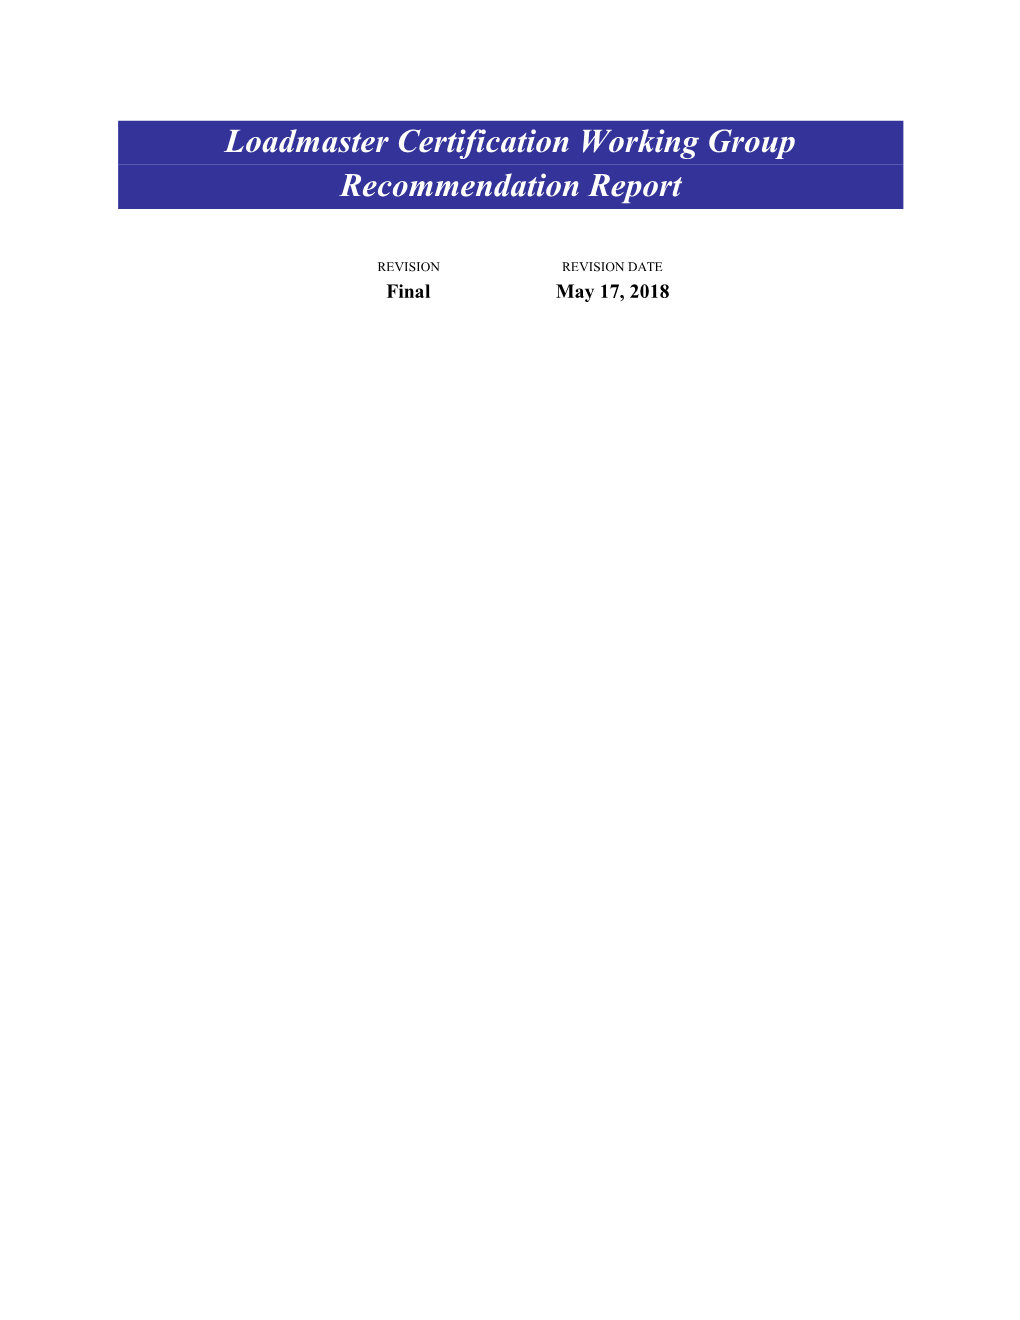 Load Master Certification Working Group Recommendation Report